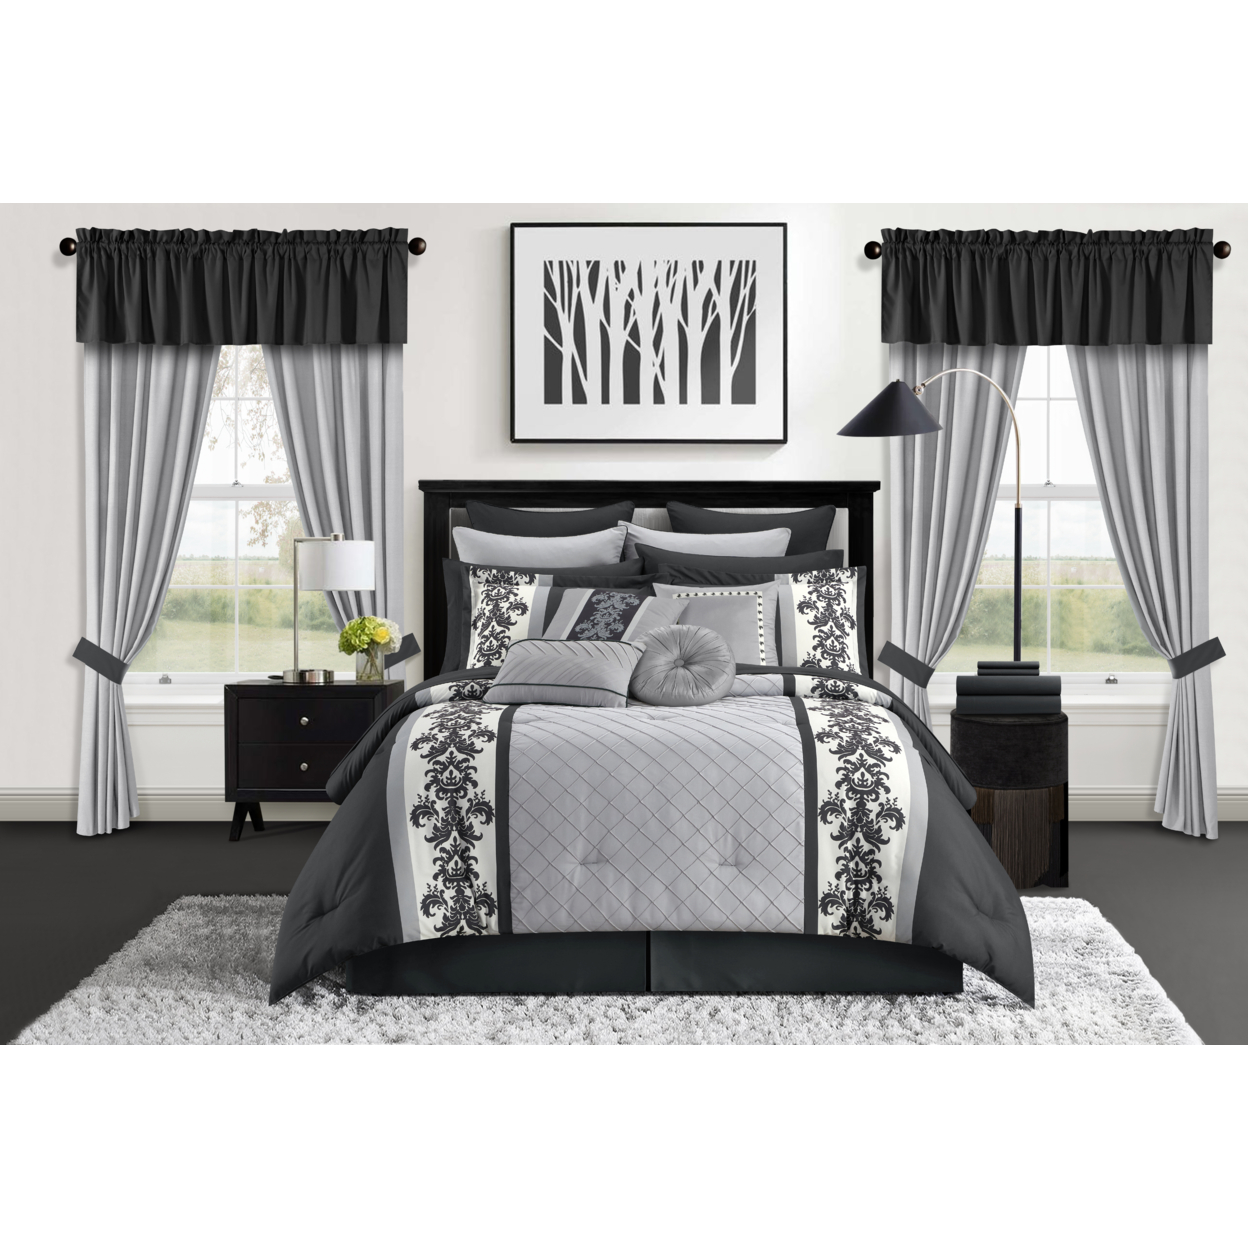 Dyllan 30 Piece Comforter Set Color Block Diamond Stitched Printed Scroll Bed In A Bag Bedding - Grey, Queen